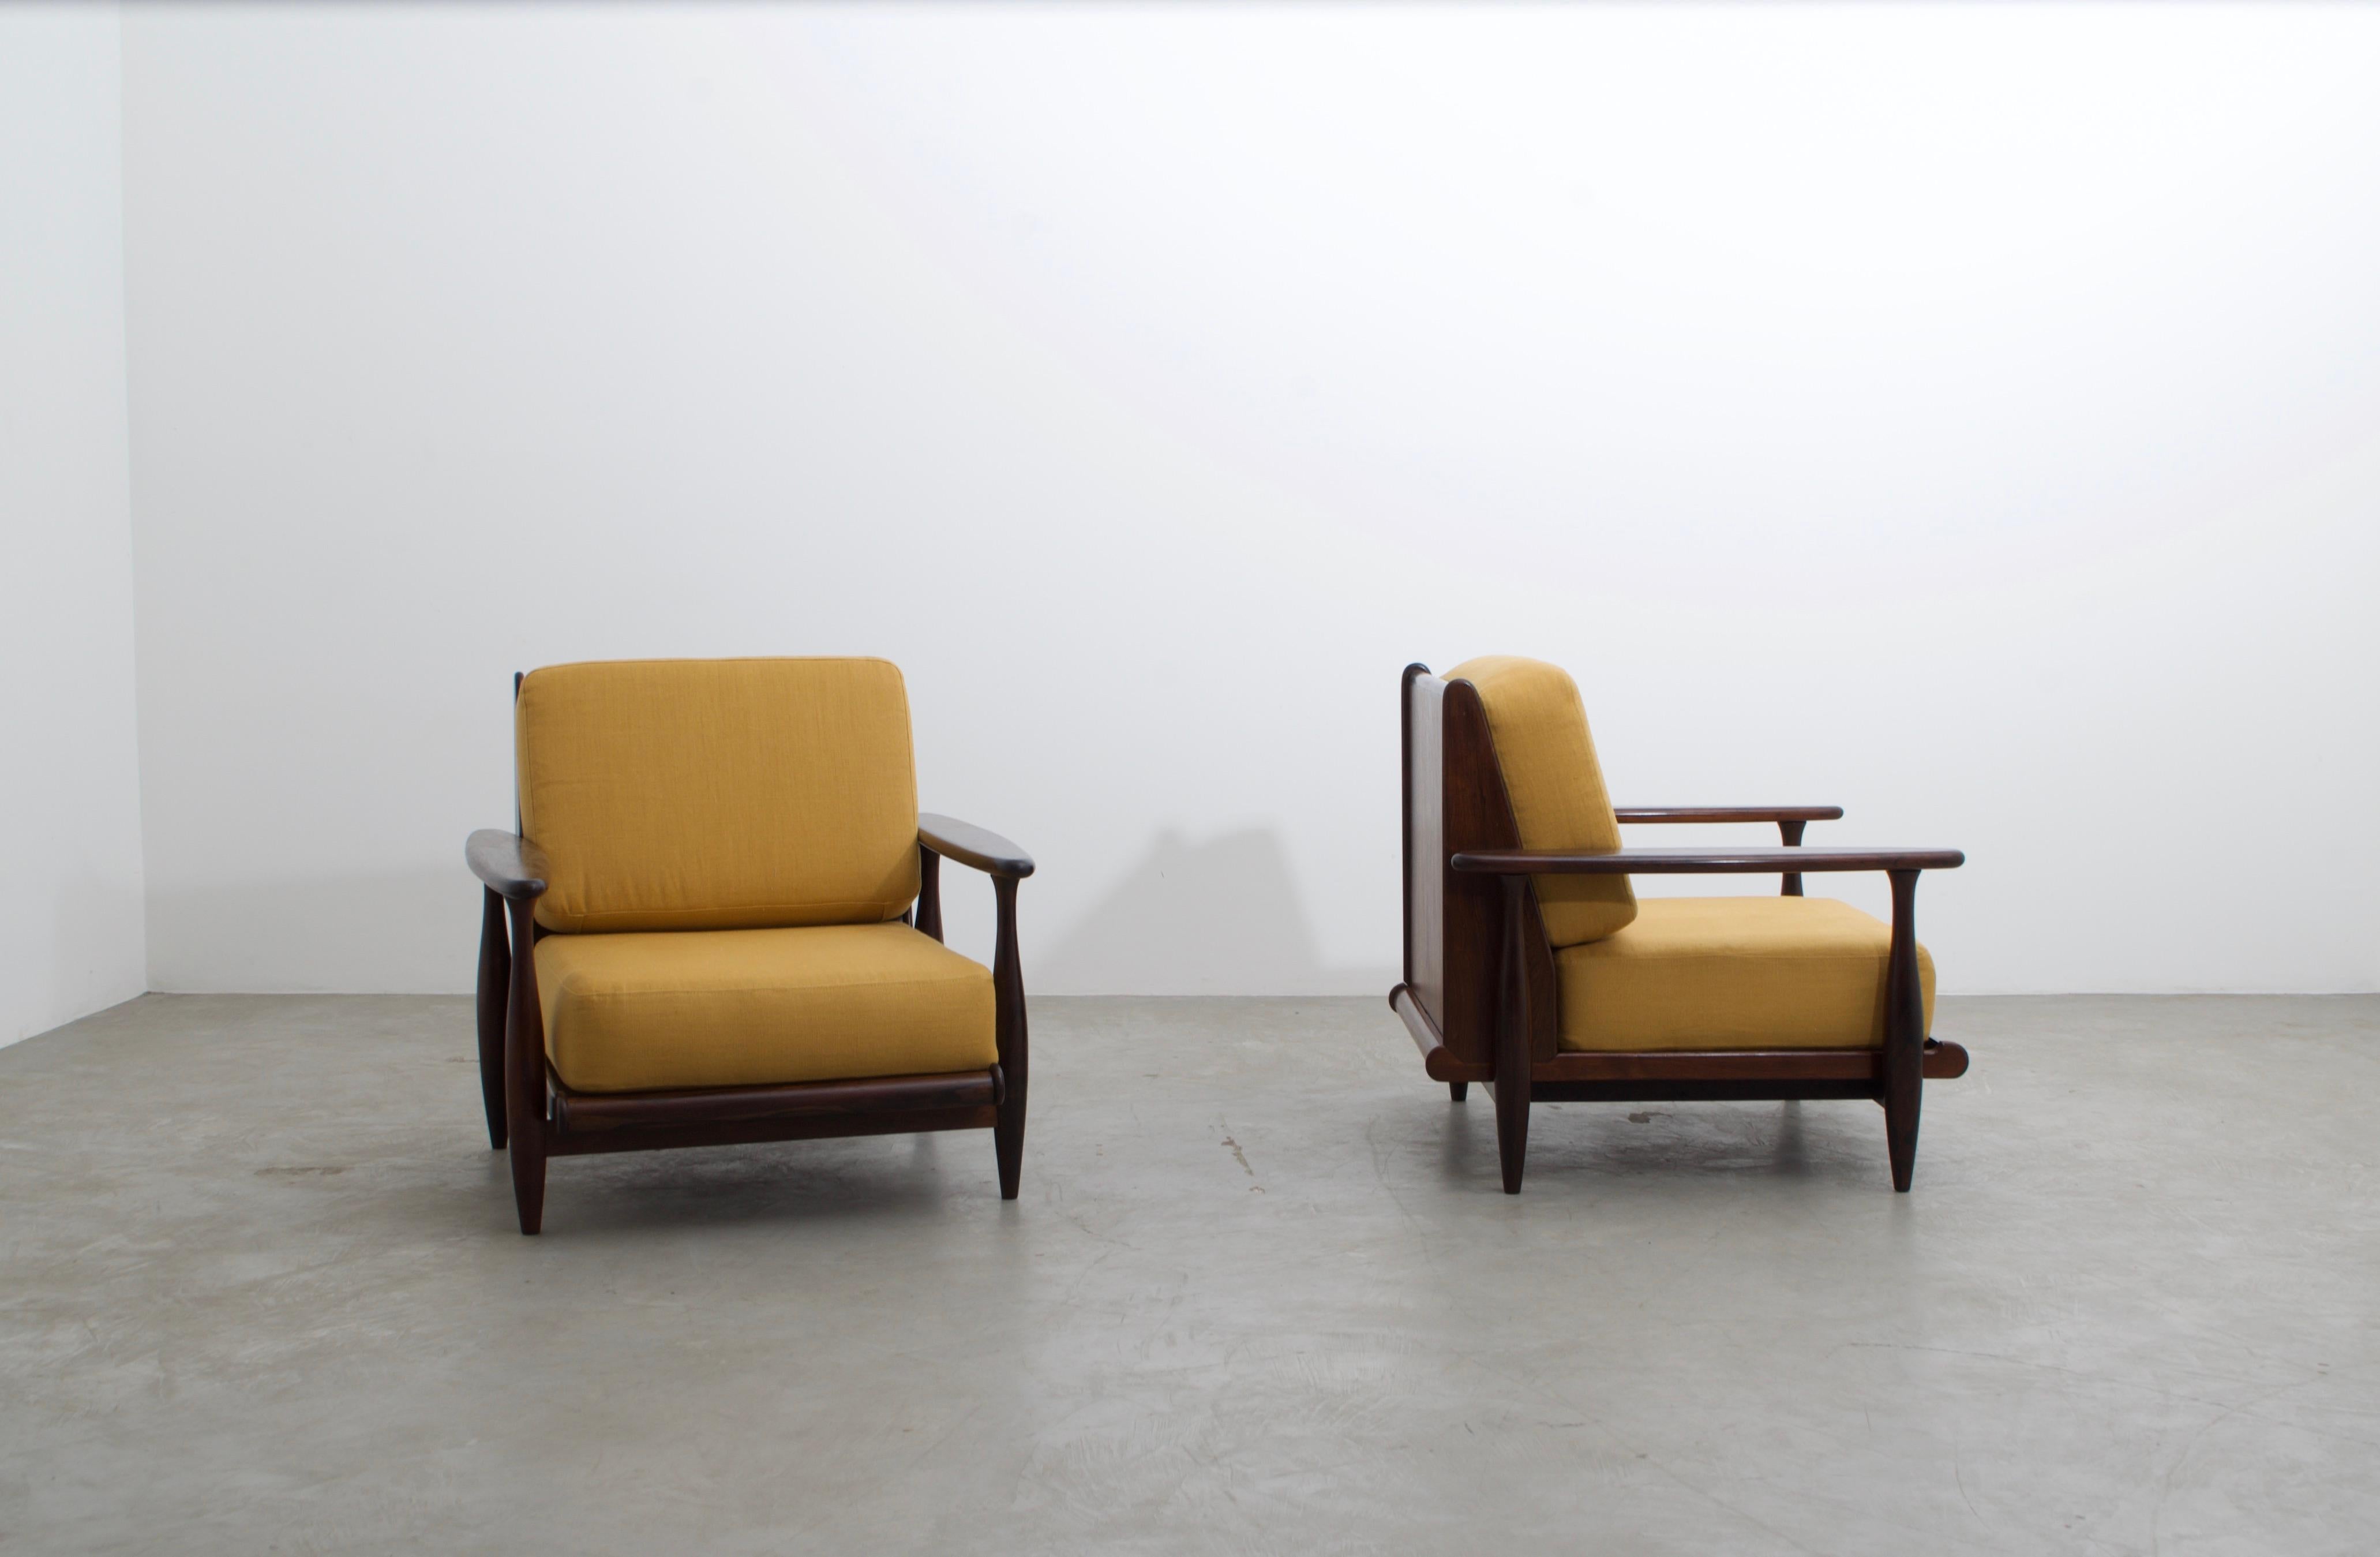 Pair of Lounge Chairs by Liceu de Artes e Ofícios, 1960's, Brazilian Mid-Century For Sale 2